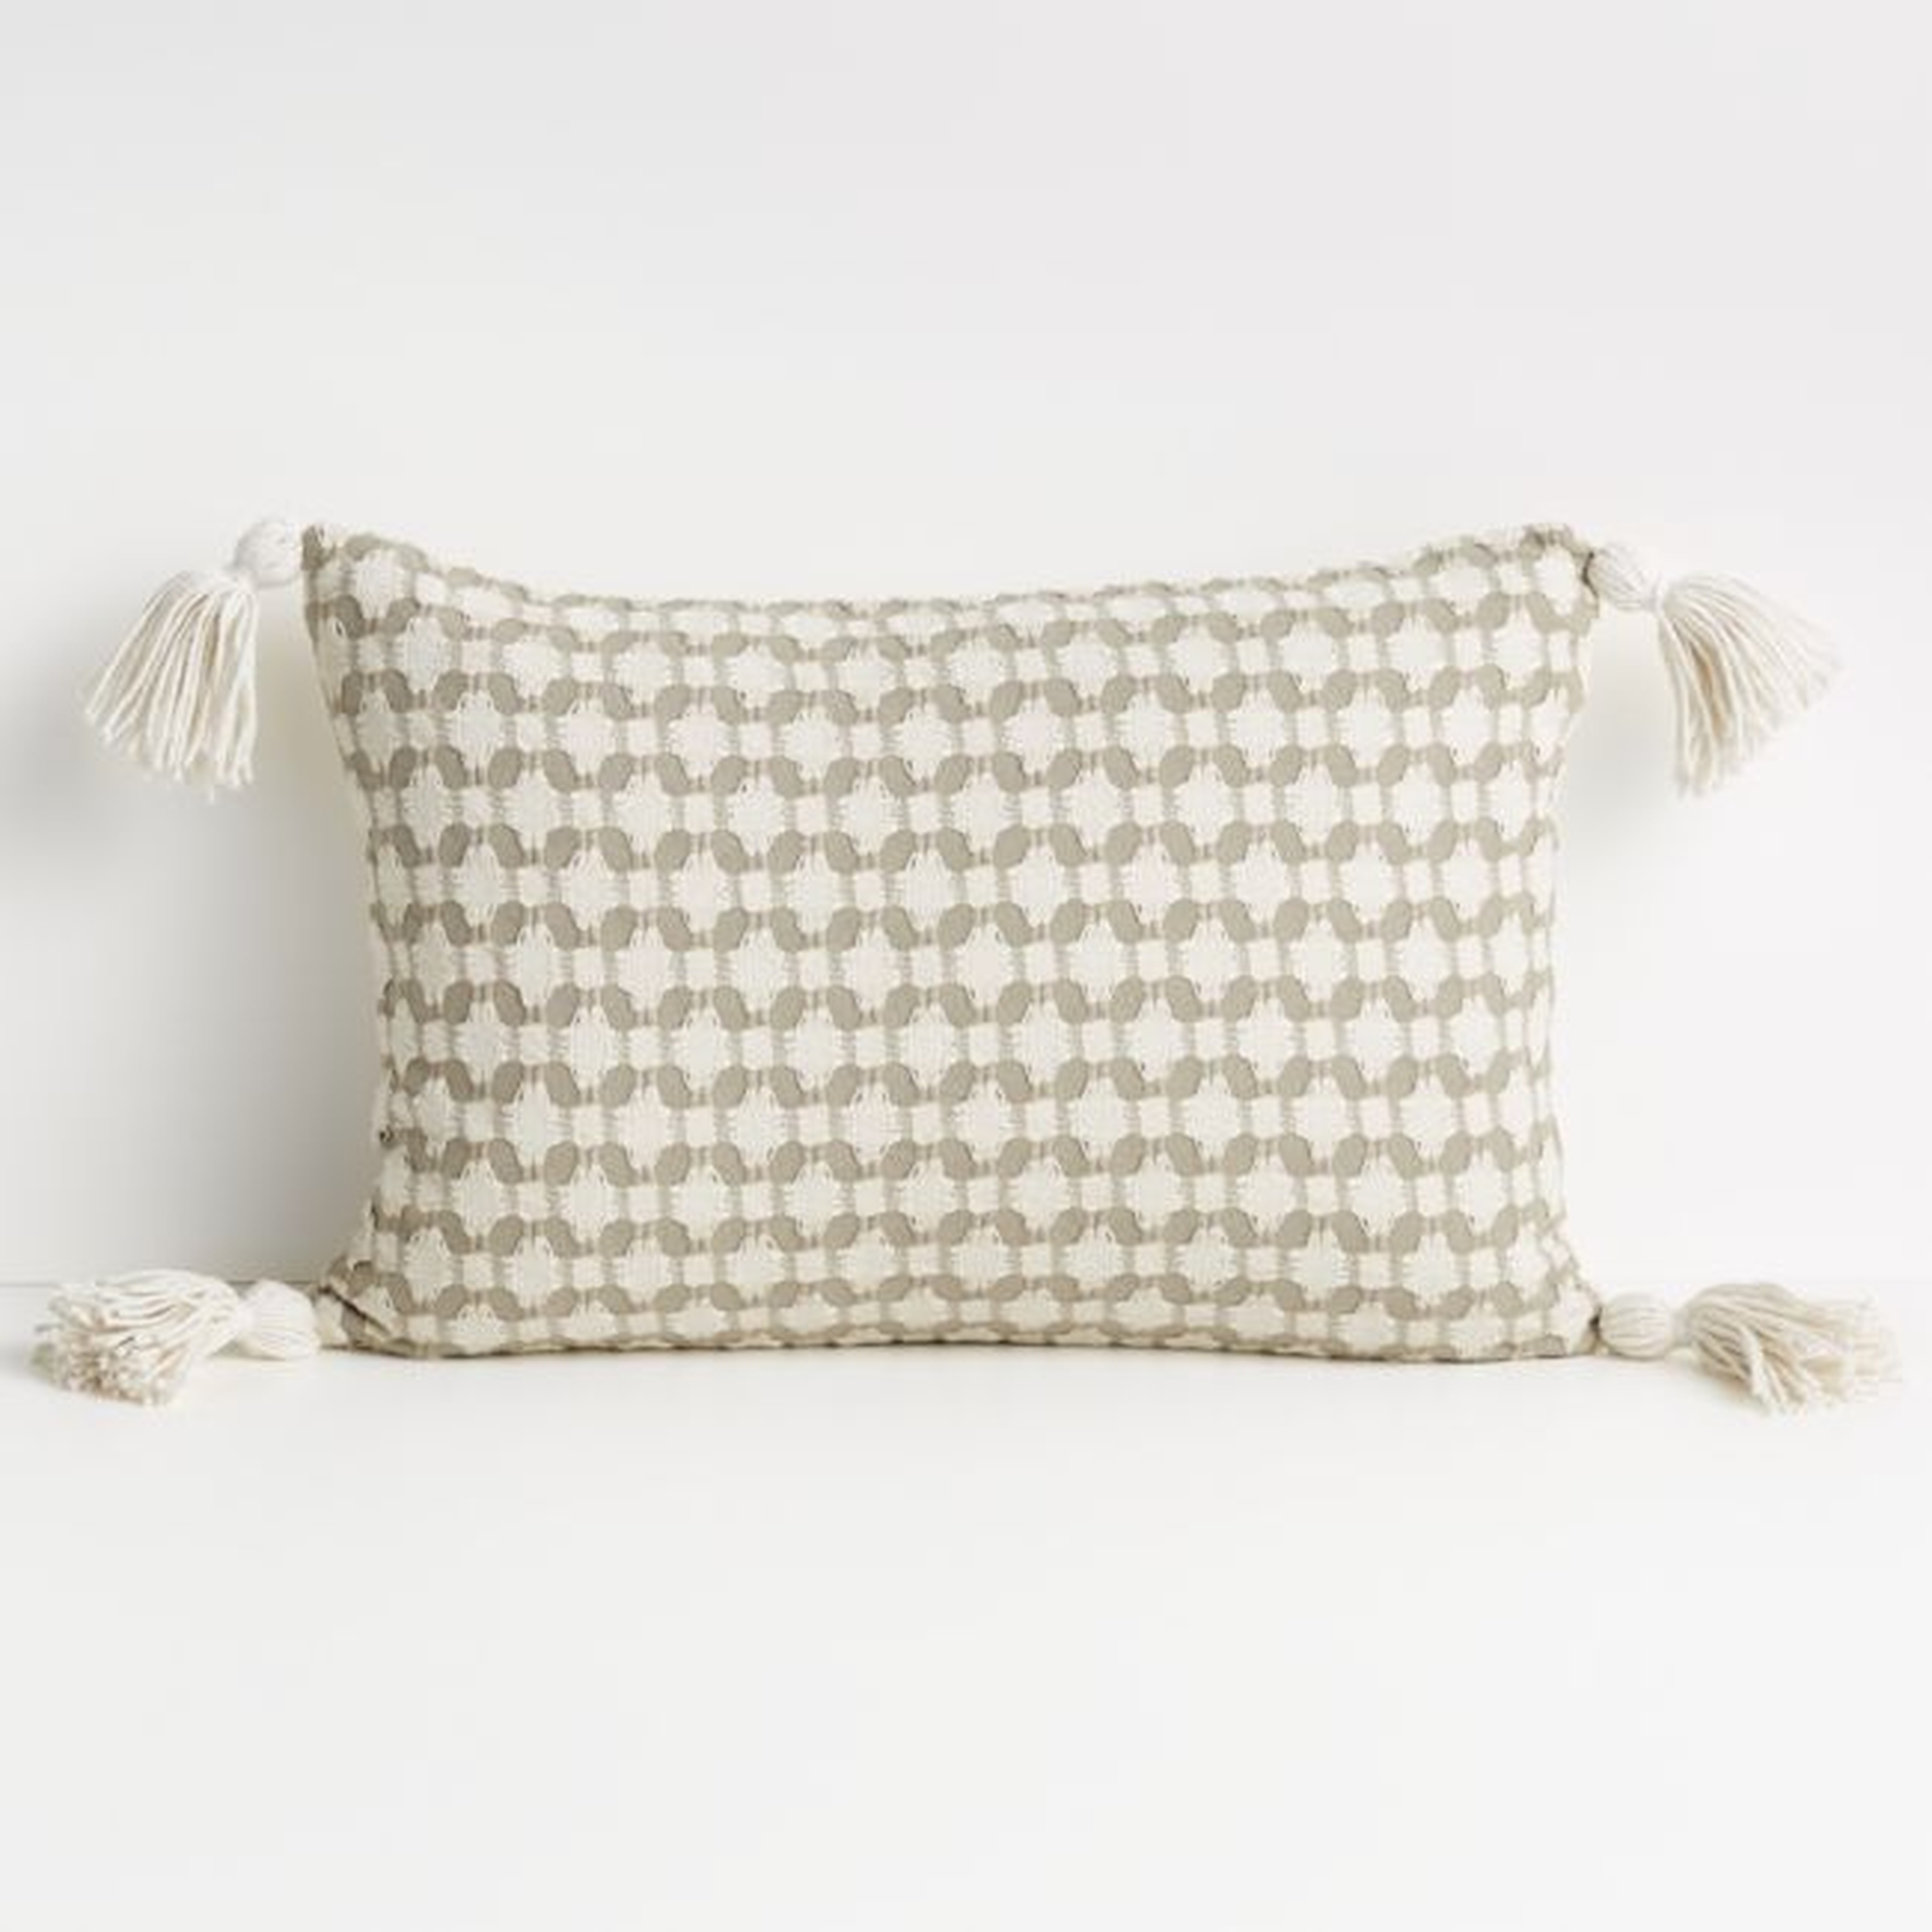 Tahona Textured Pillow with Feather-Down Insert, White Swan, 18" x 12" - Crate and Barrel